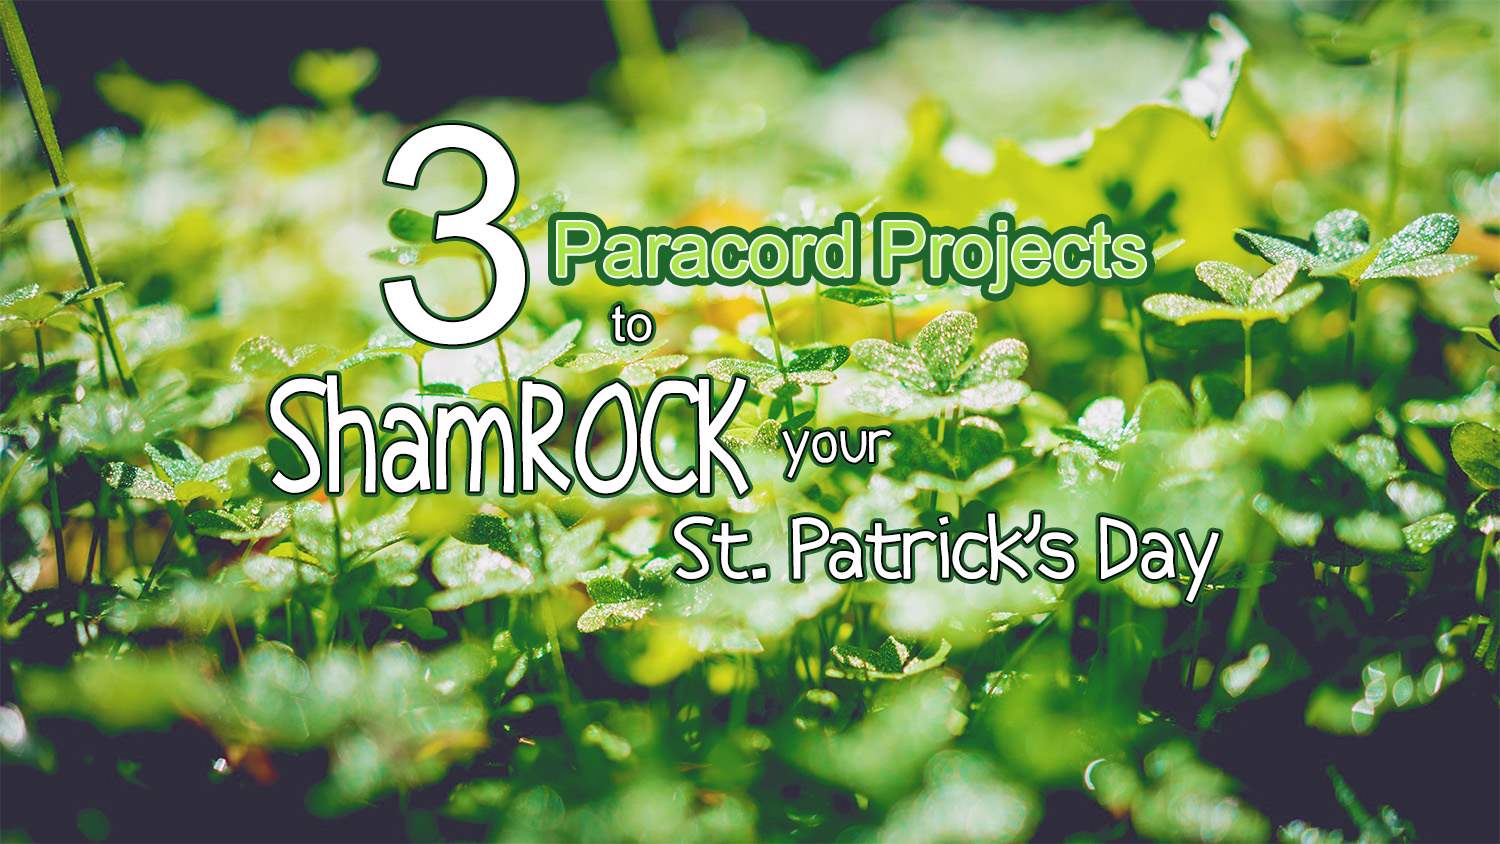 3 Paracord Projects to ShamROCK your St. Patricks Day